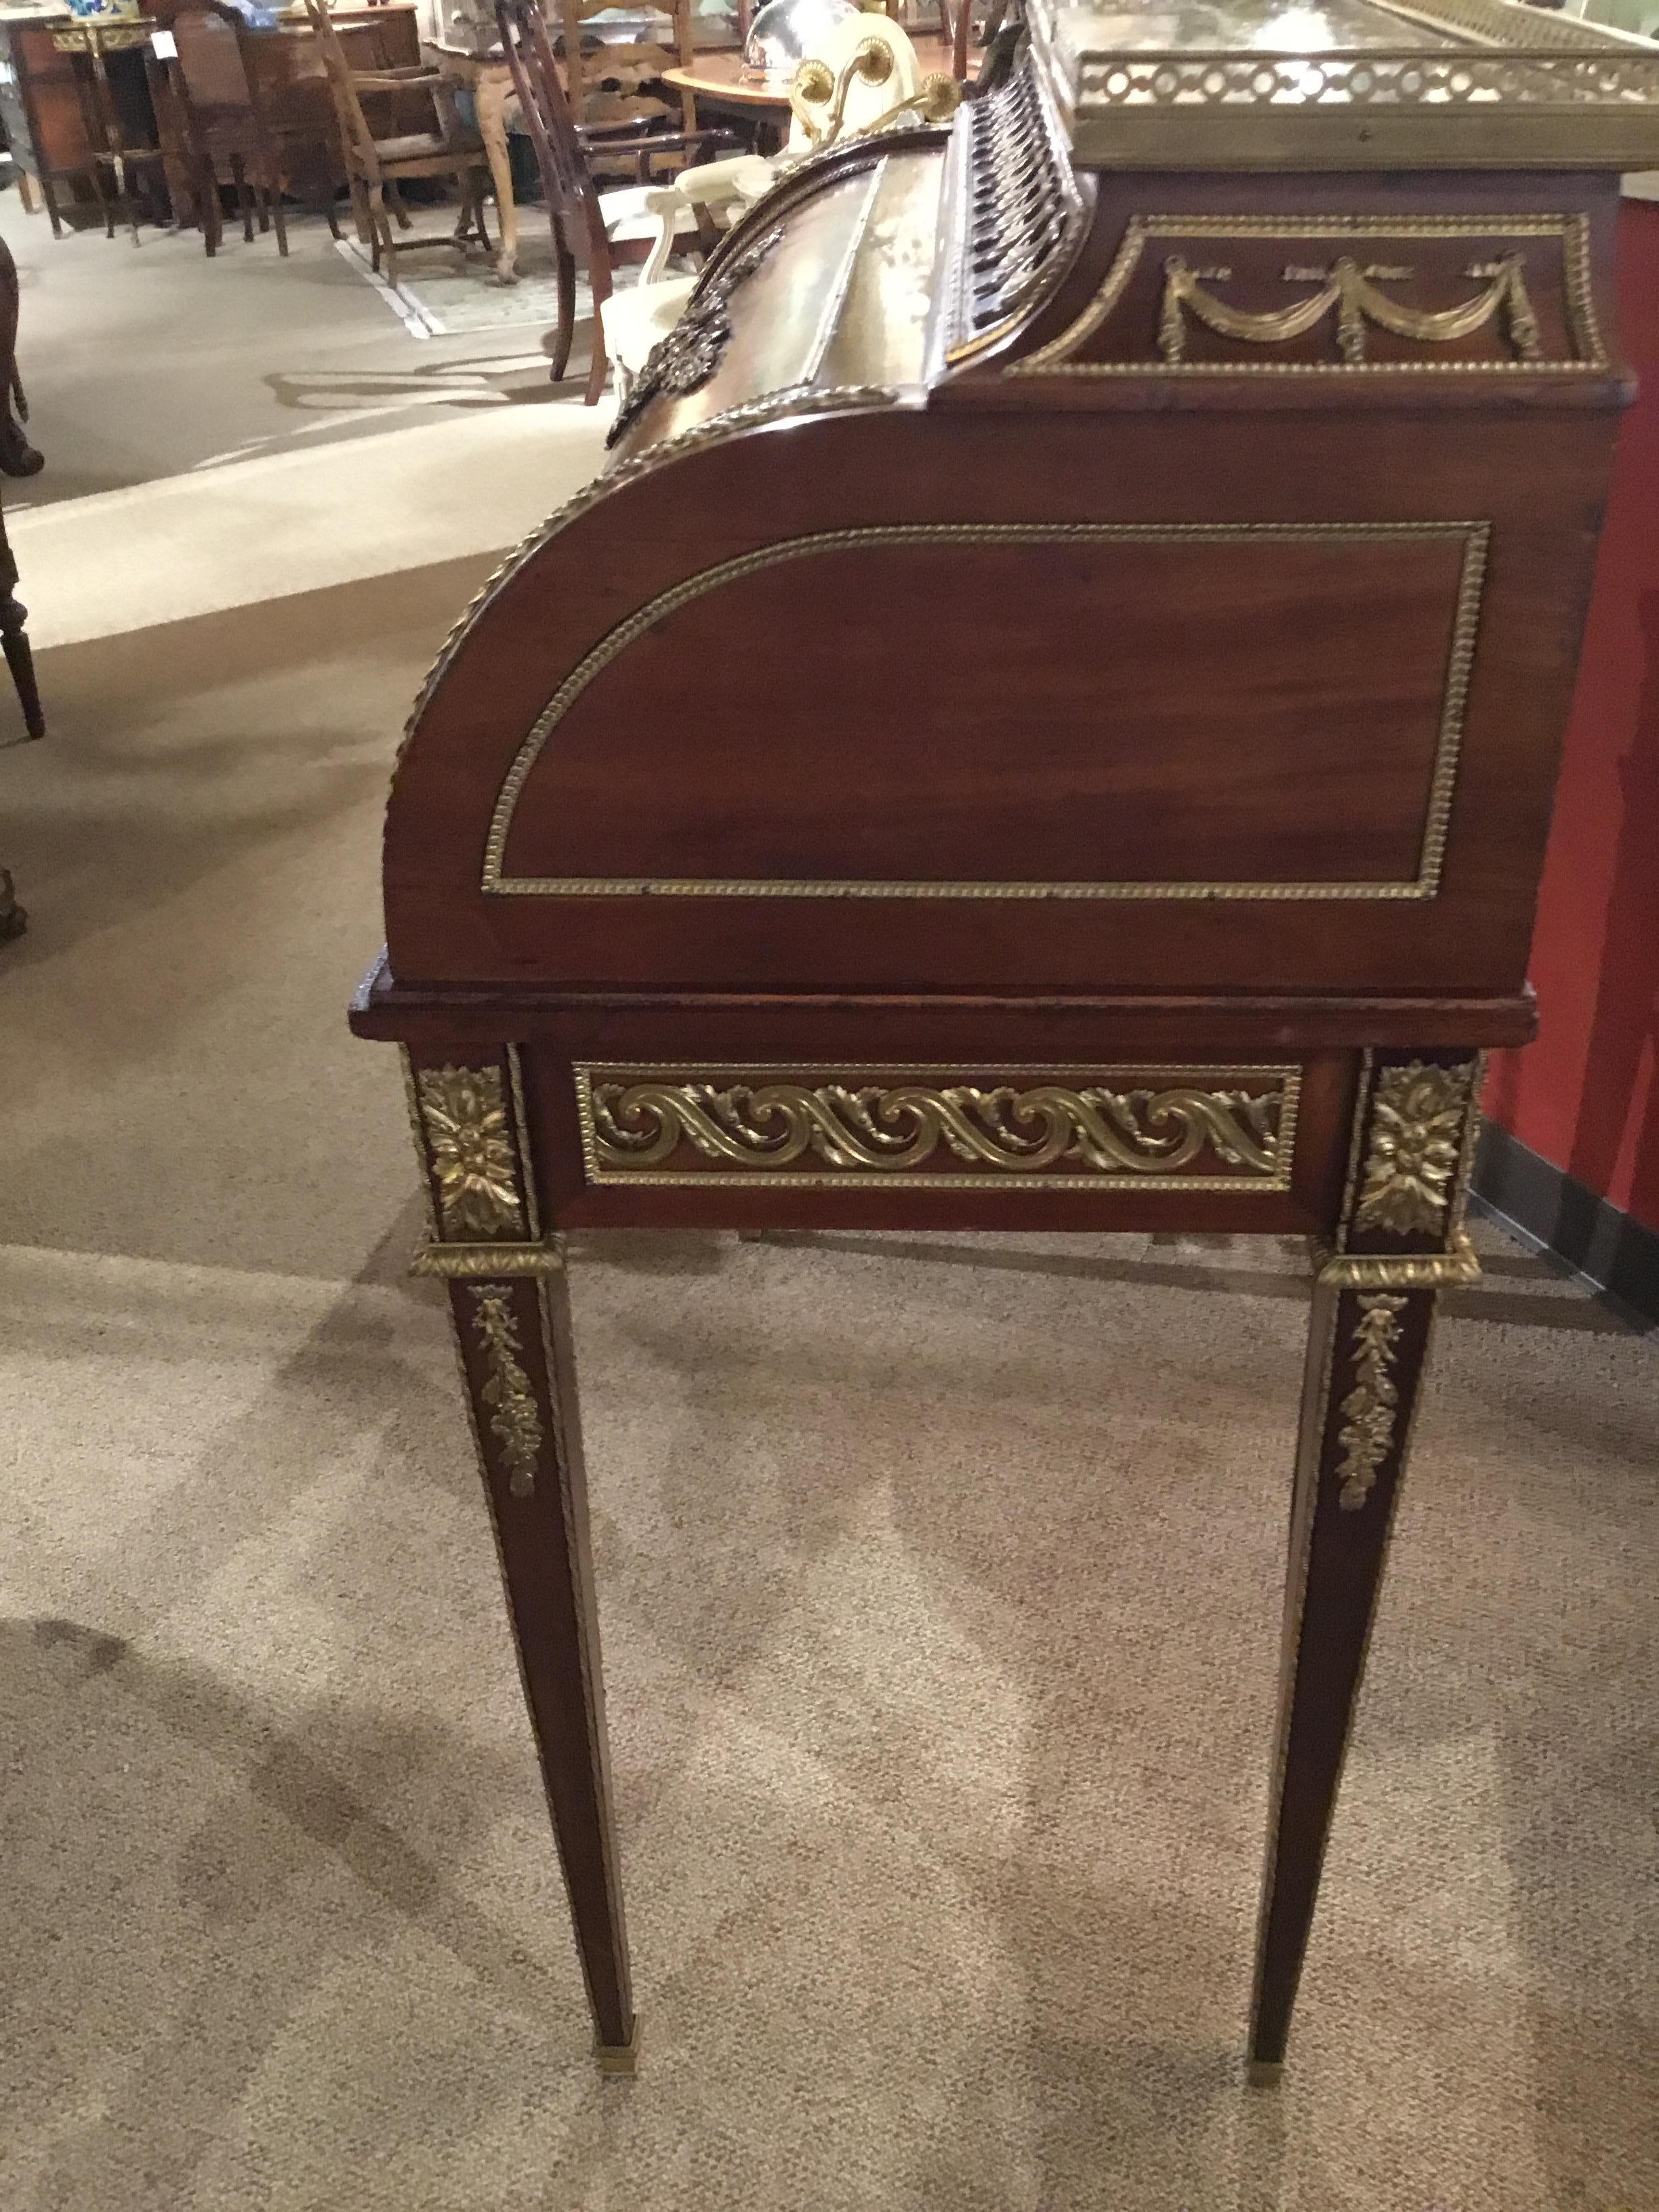 19th century desk with a Cylindre roll top opening to a leather top that pulls out for ease
In use. Gilt bronze mounts with floral gilt center decoration with wreath. Square tapered
Legs with gilt beading and bronze sabots.